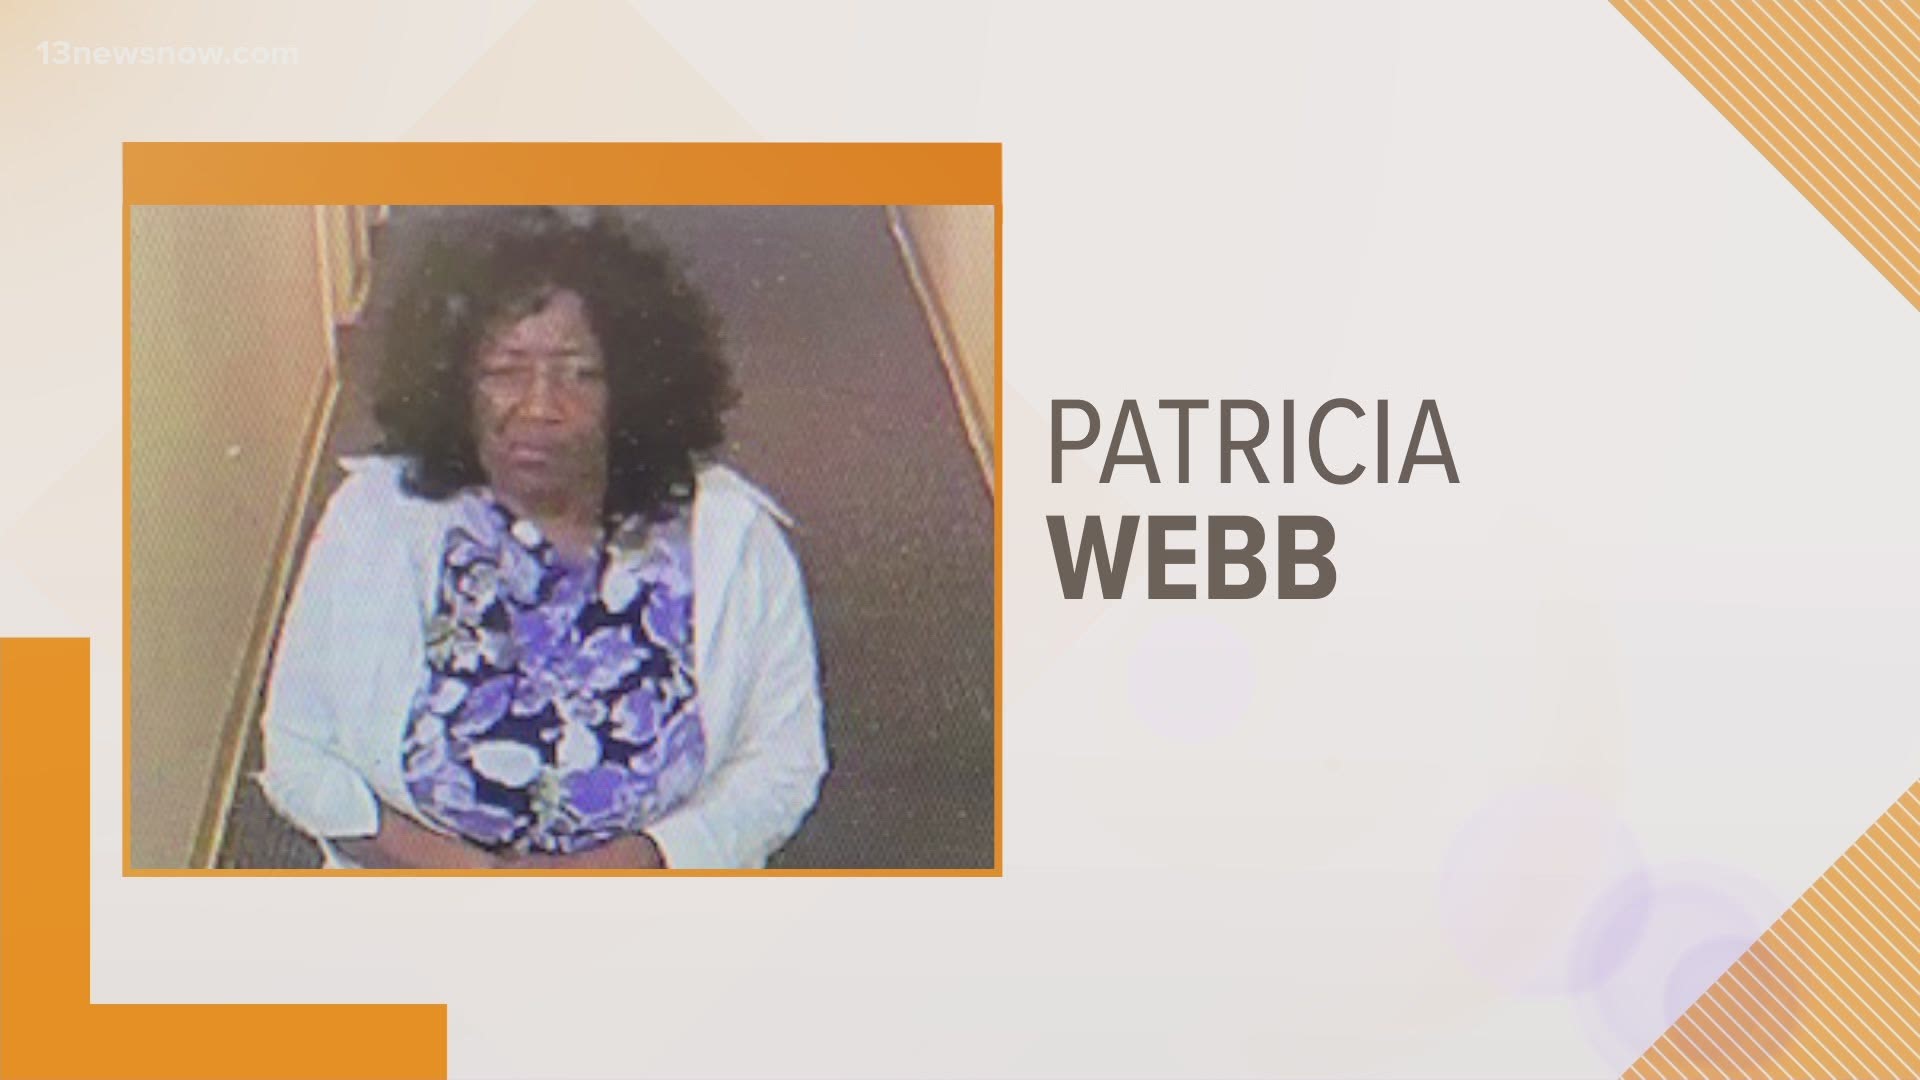 Have you seen Patricia Webb? She was last seen at Silvertree Seniors Center. She is currently on medication for high blood pressure and congestive heart failure.